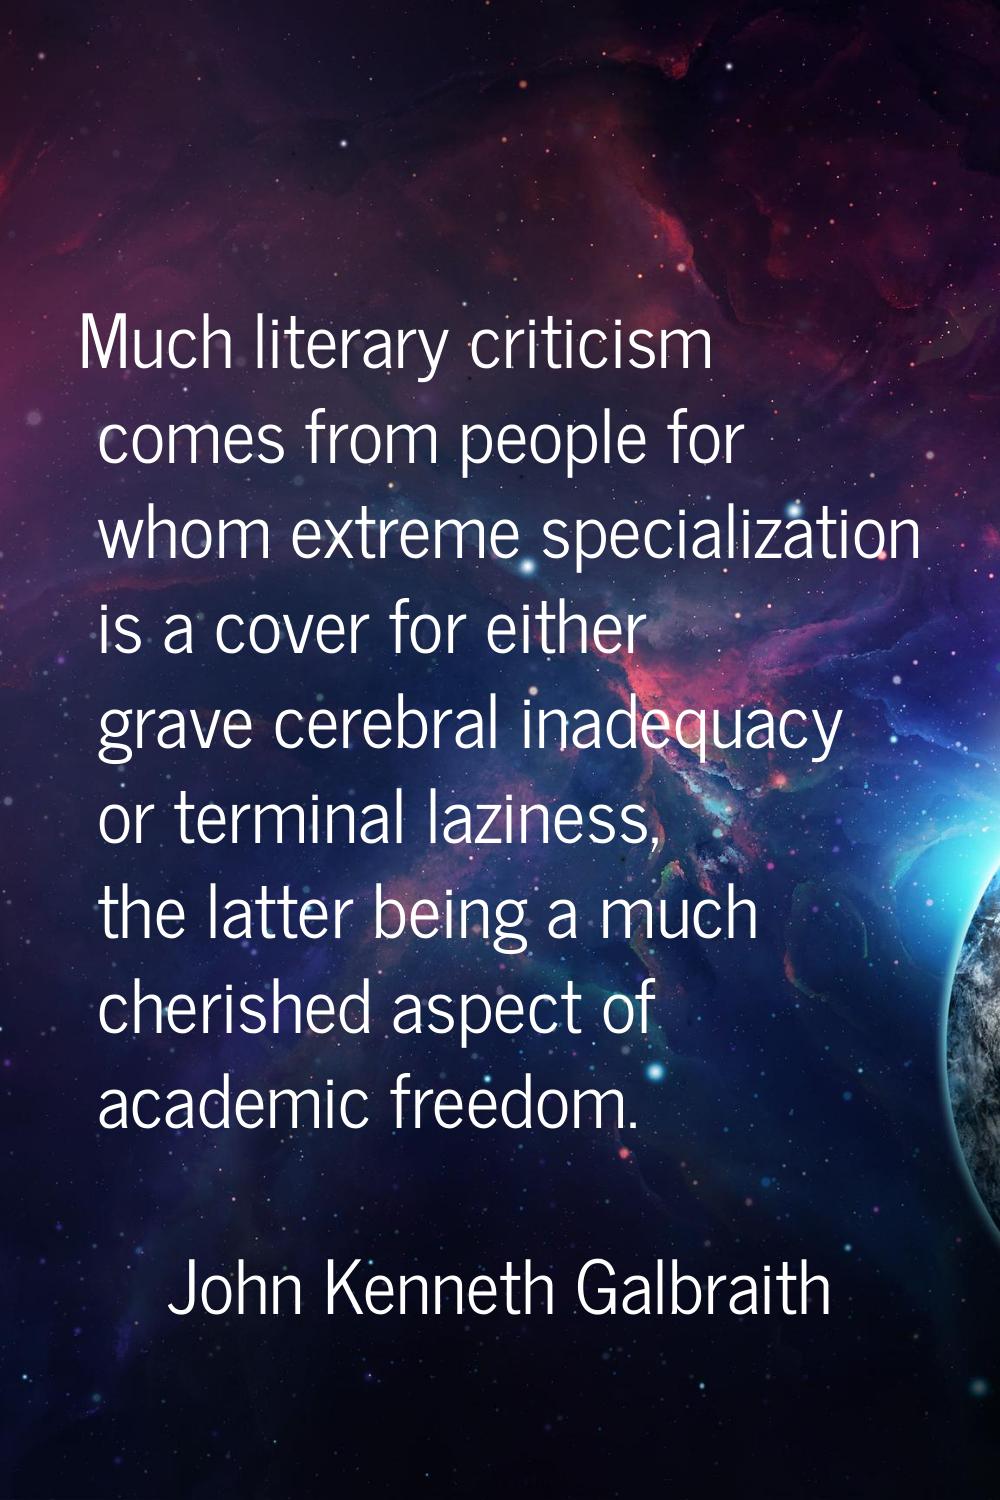 Much literary criticism comes from people for whom extreme specialization is a cover for either gra